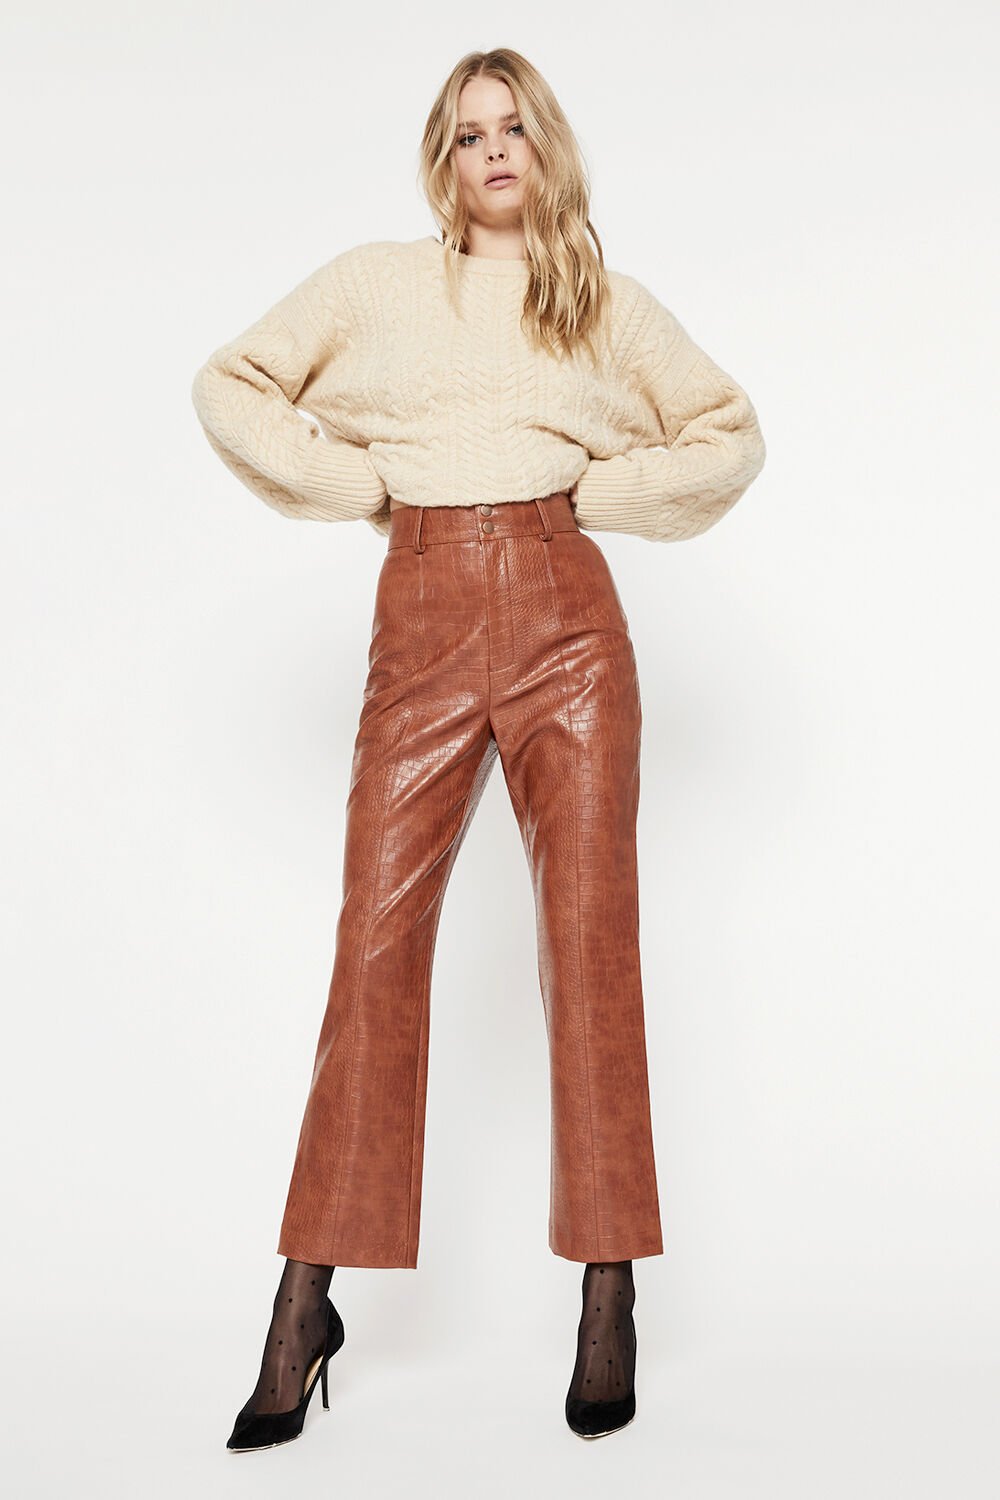 THE MOCHA FAUX LEATHER PANTS  THE STYLE UNION